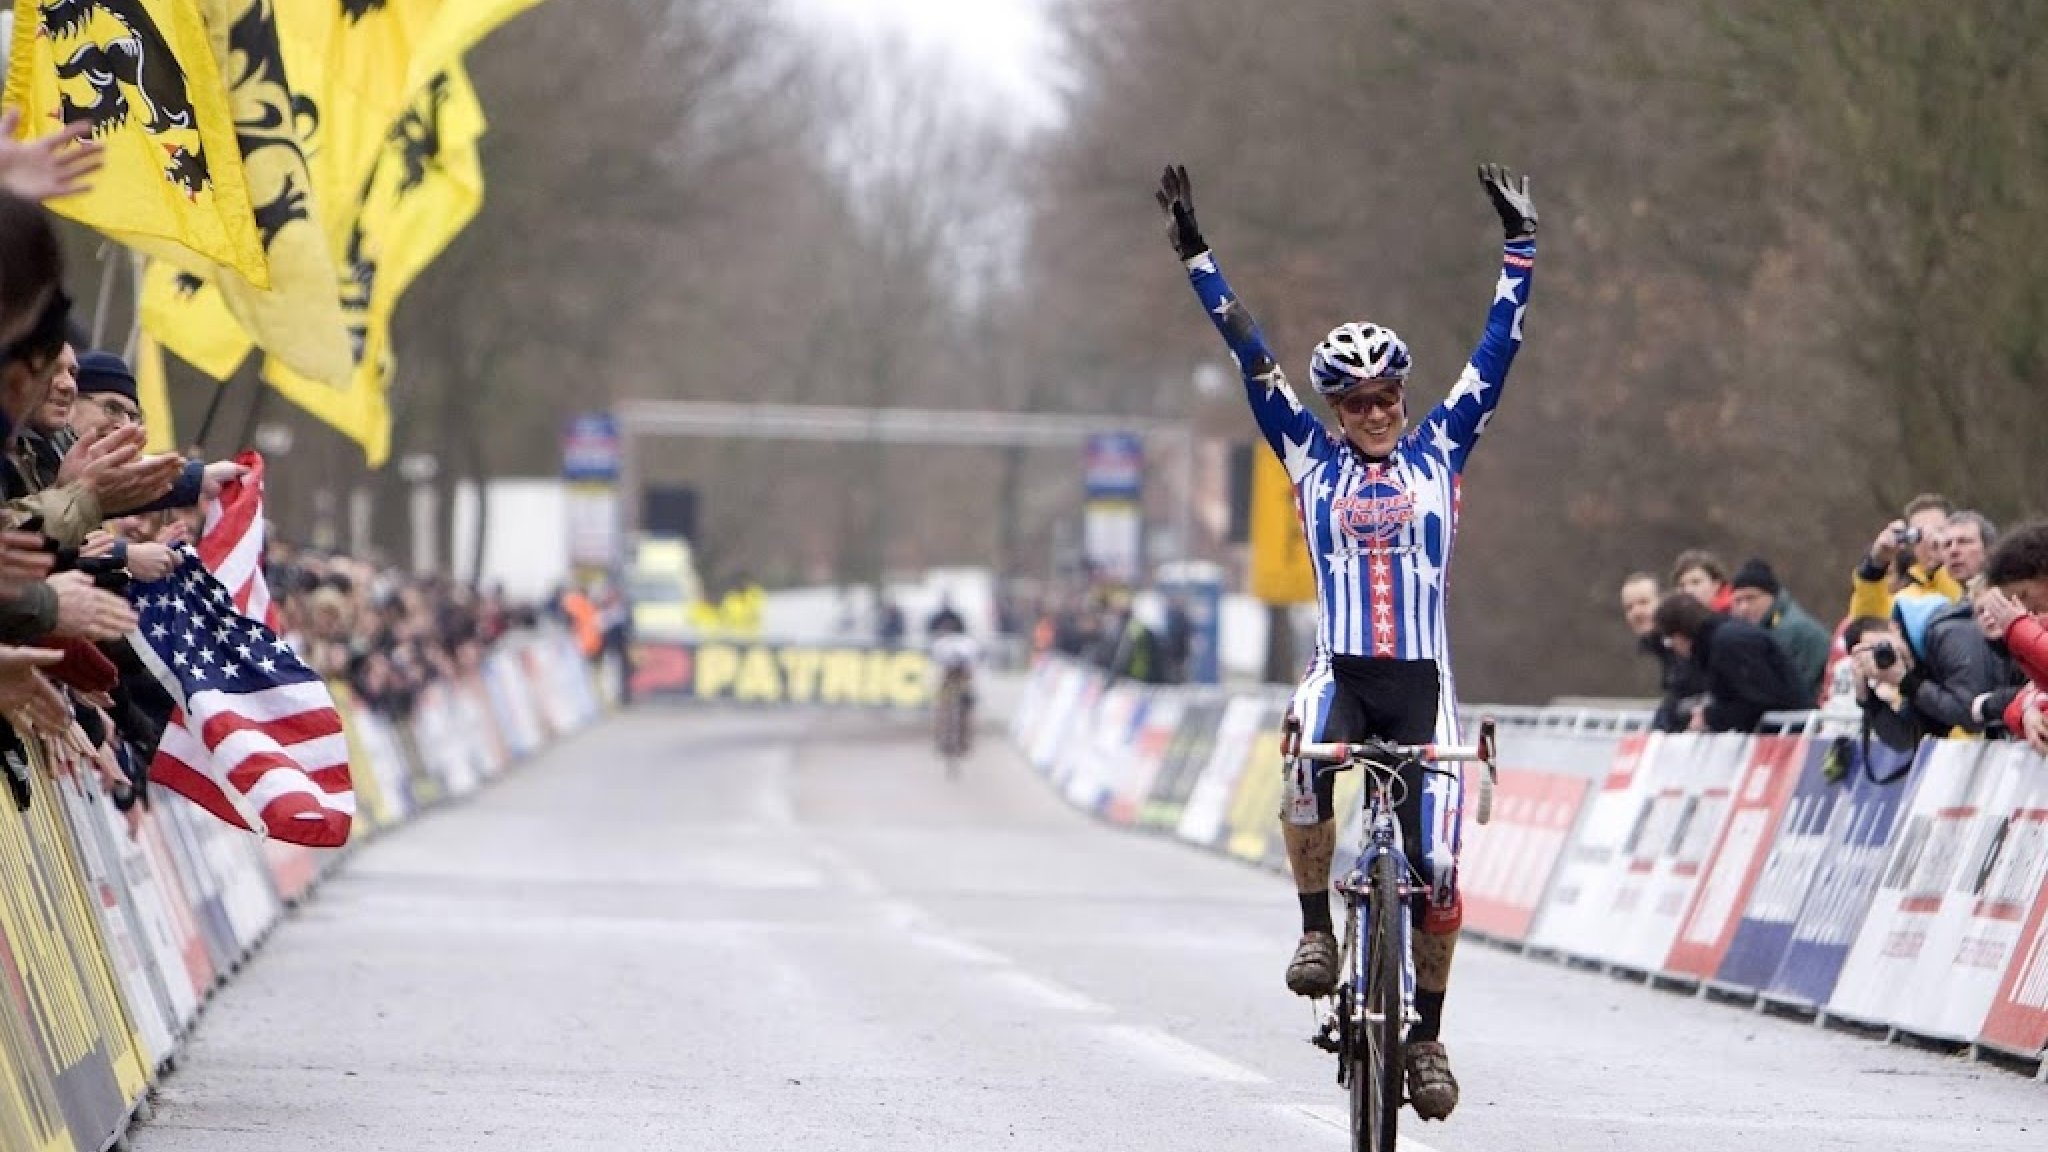 Cyclo rider Cross Compton stops after positive doping test